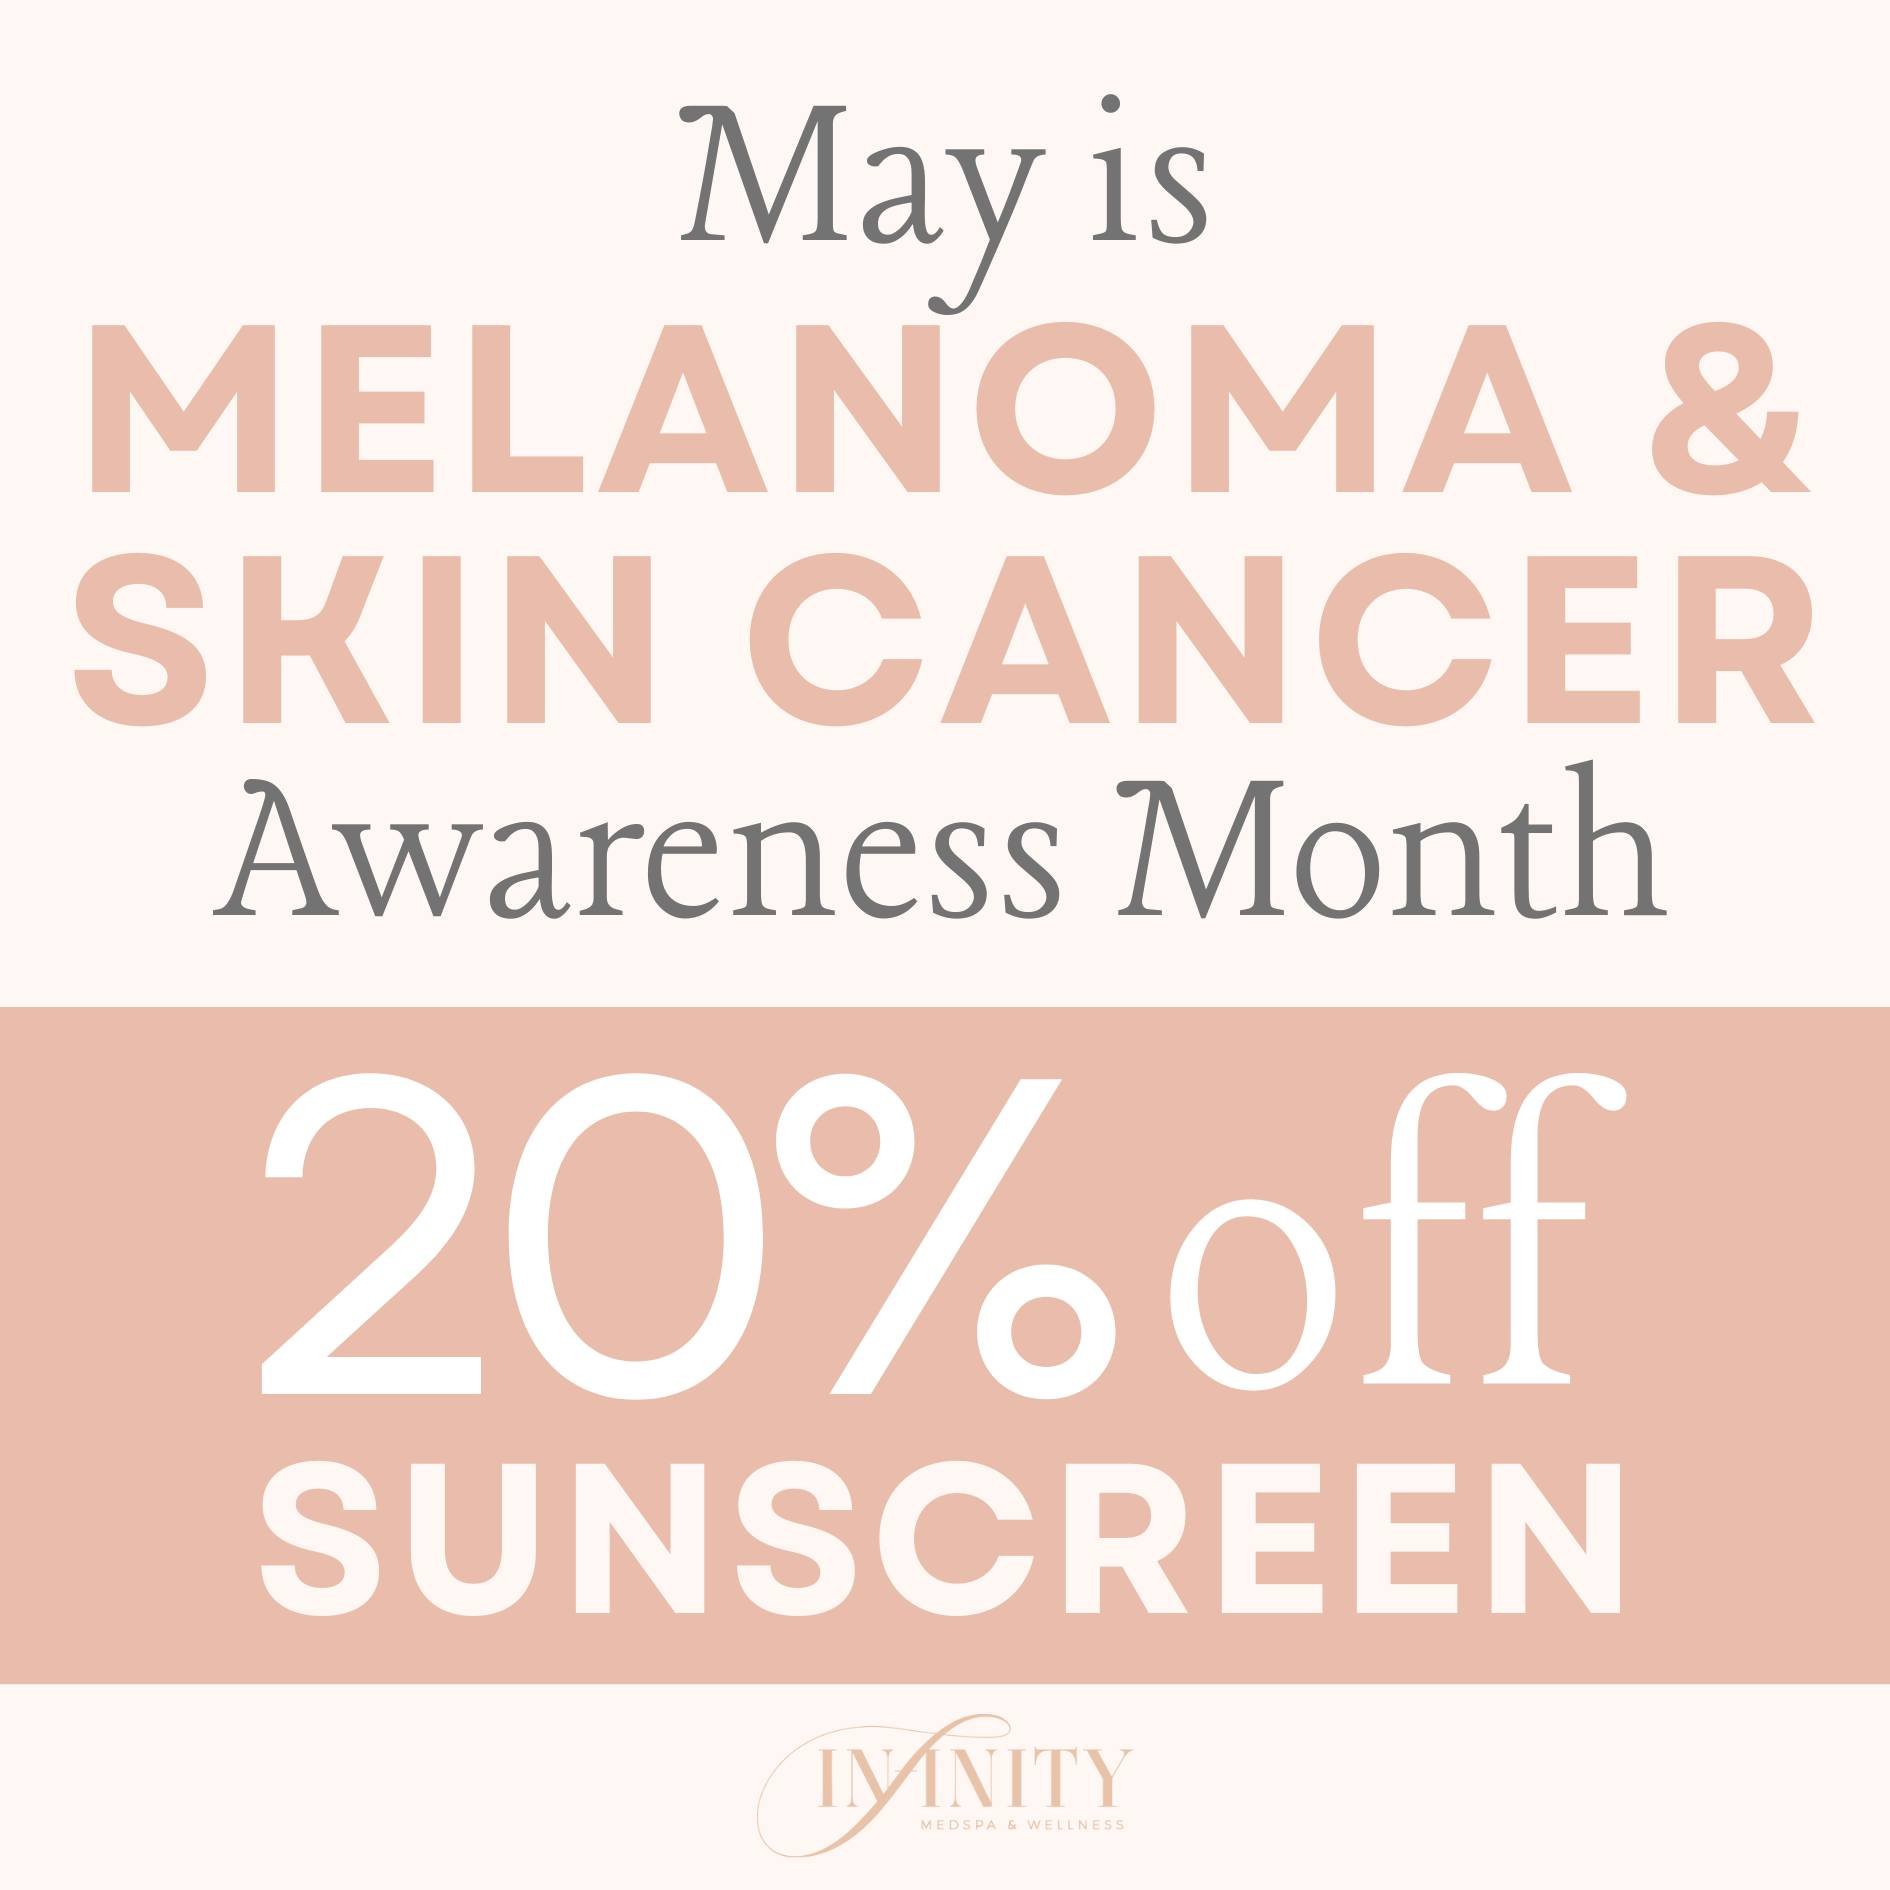 May is Melanoma &amp; Skin Cancer Awareness Month!

SUNSCREEN IS 20% OFF ALL MONTH!

🌞 Stock up for the summer! 🌞

➡ Purchase online, over the phone or at the medspa!

#infinitymedspaandwellness #charlottenc #medspacharlotte #sunscnreen #sunscreens